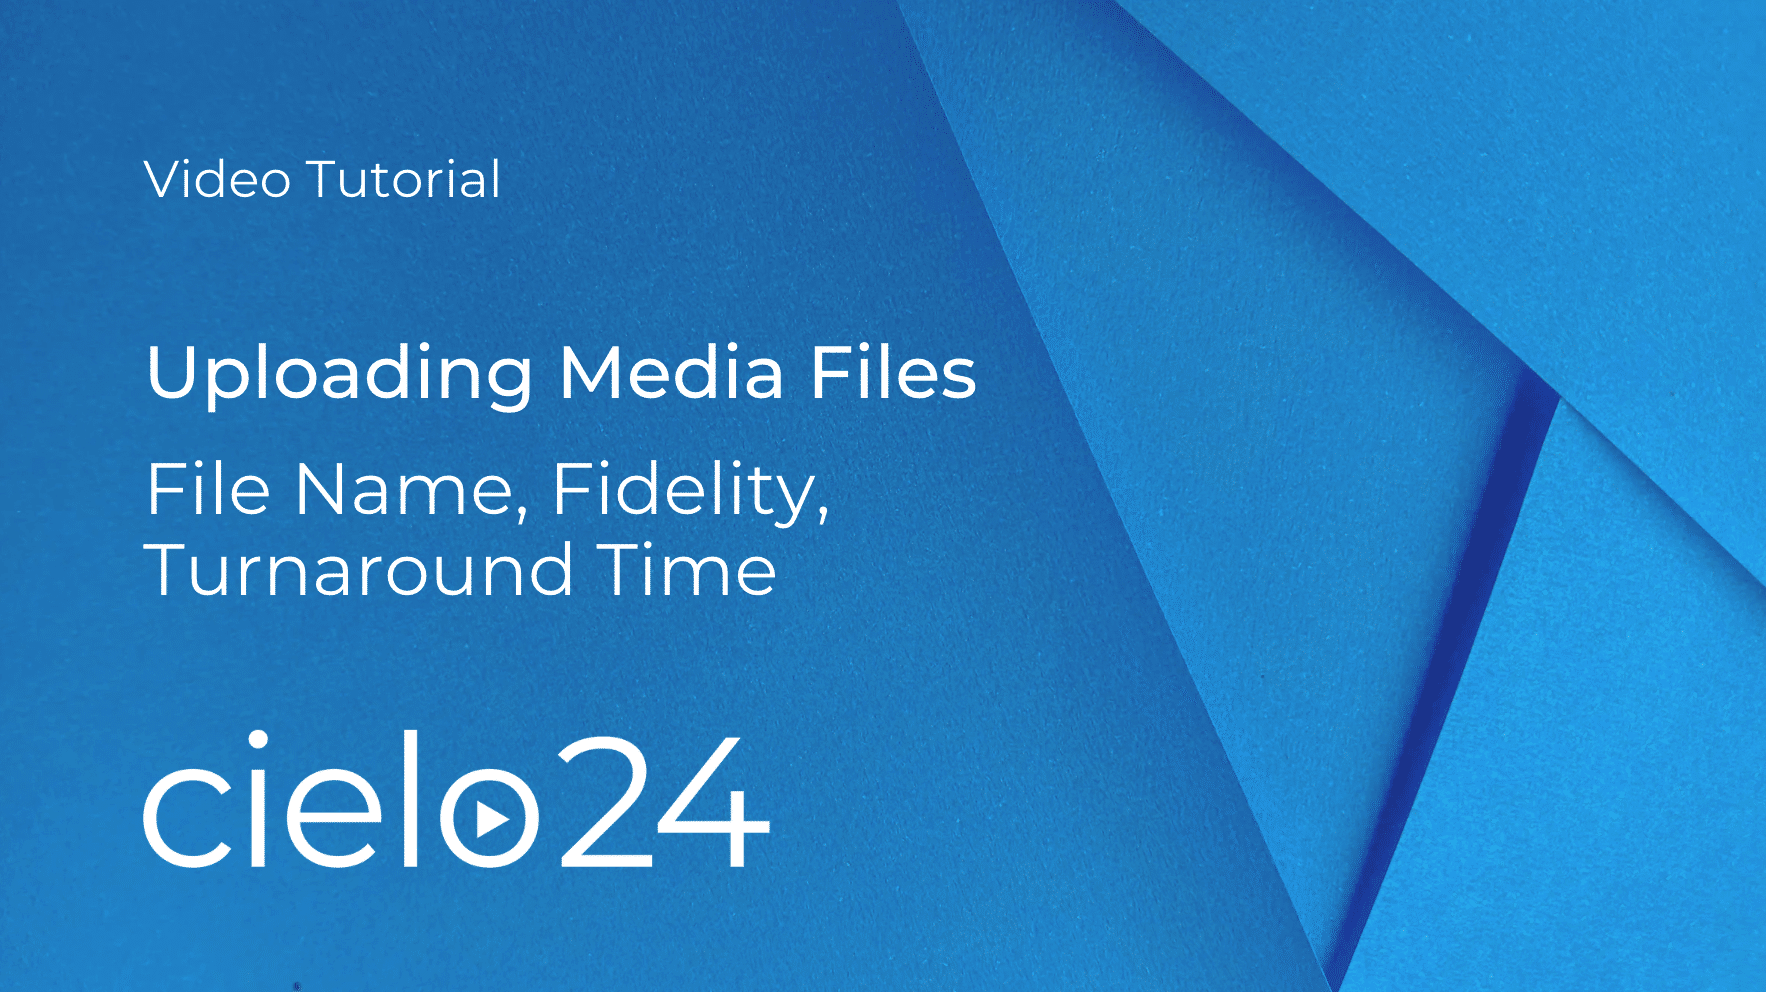 Training link for Uploading Media Files with cielo24 captions and transcripts